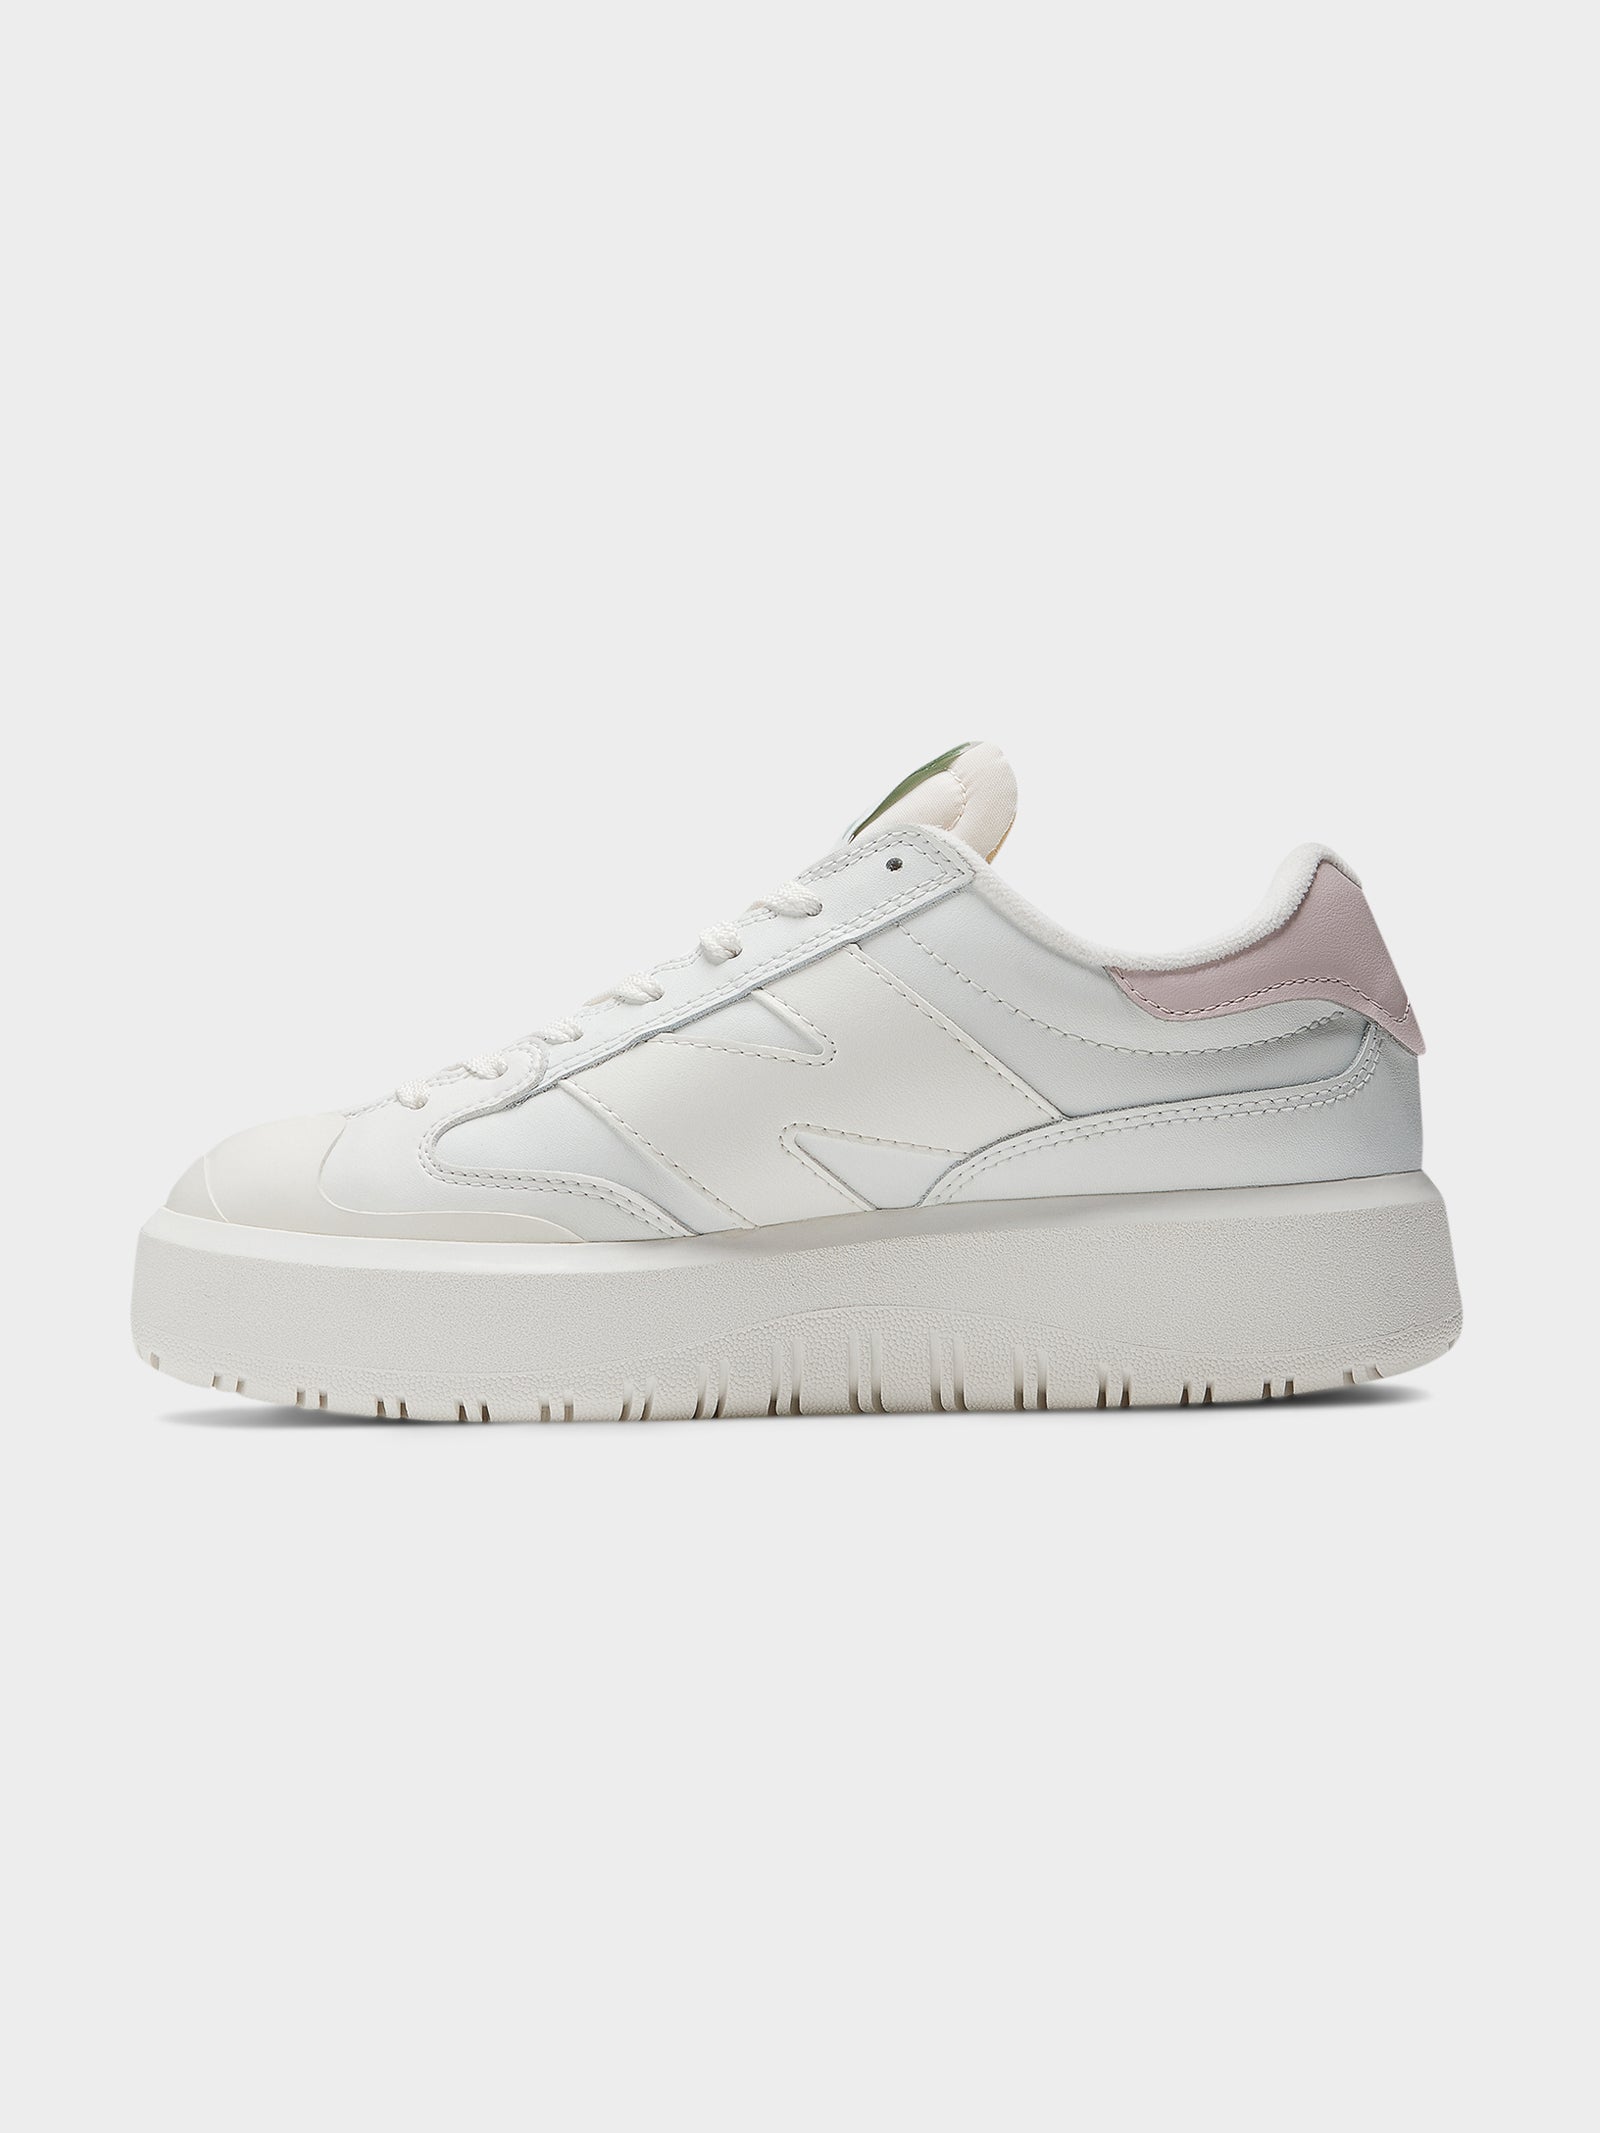 Unisex CT302 Sneakers in White, Stone Pink & Sage Leaf - Glue Store